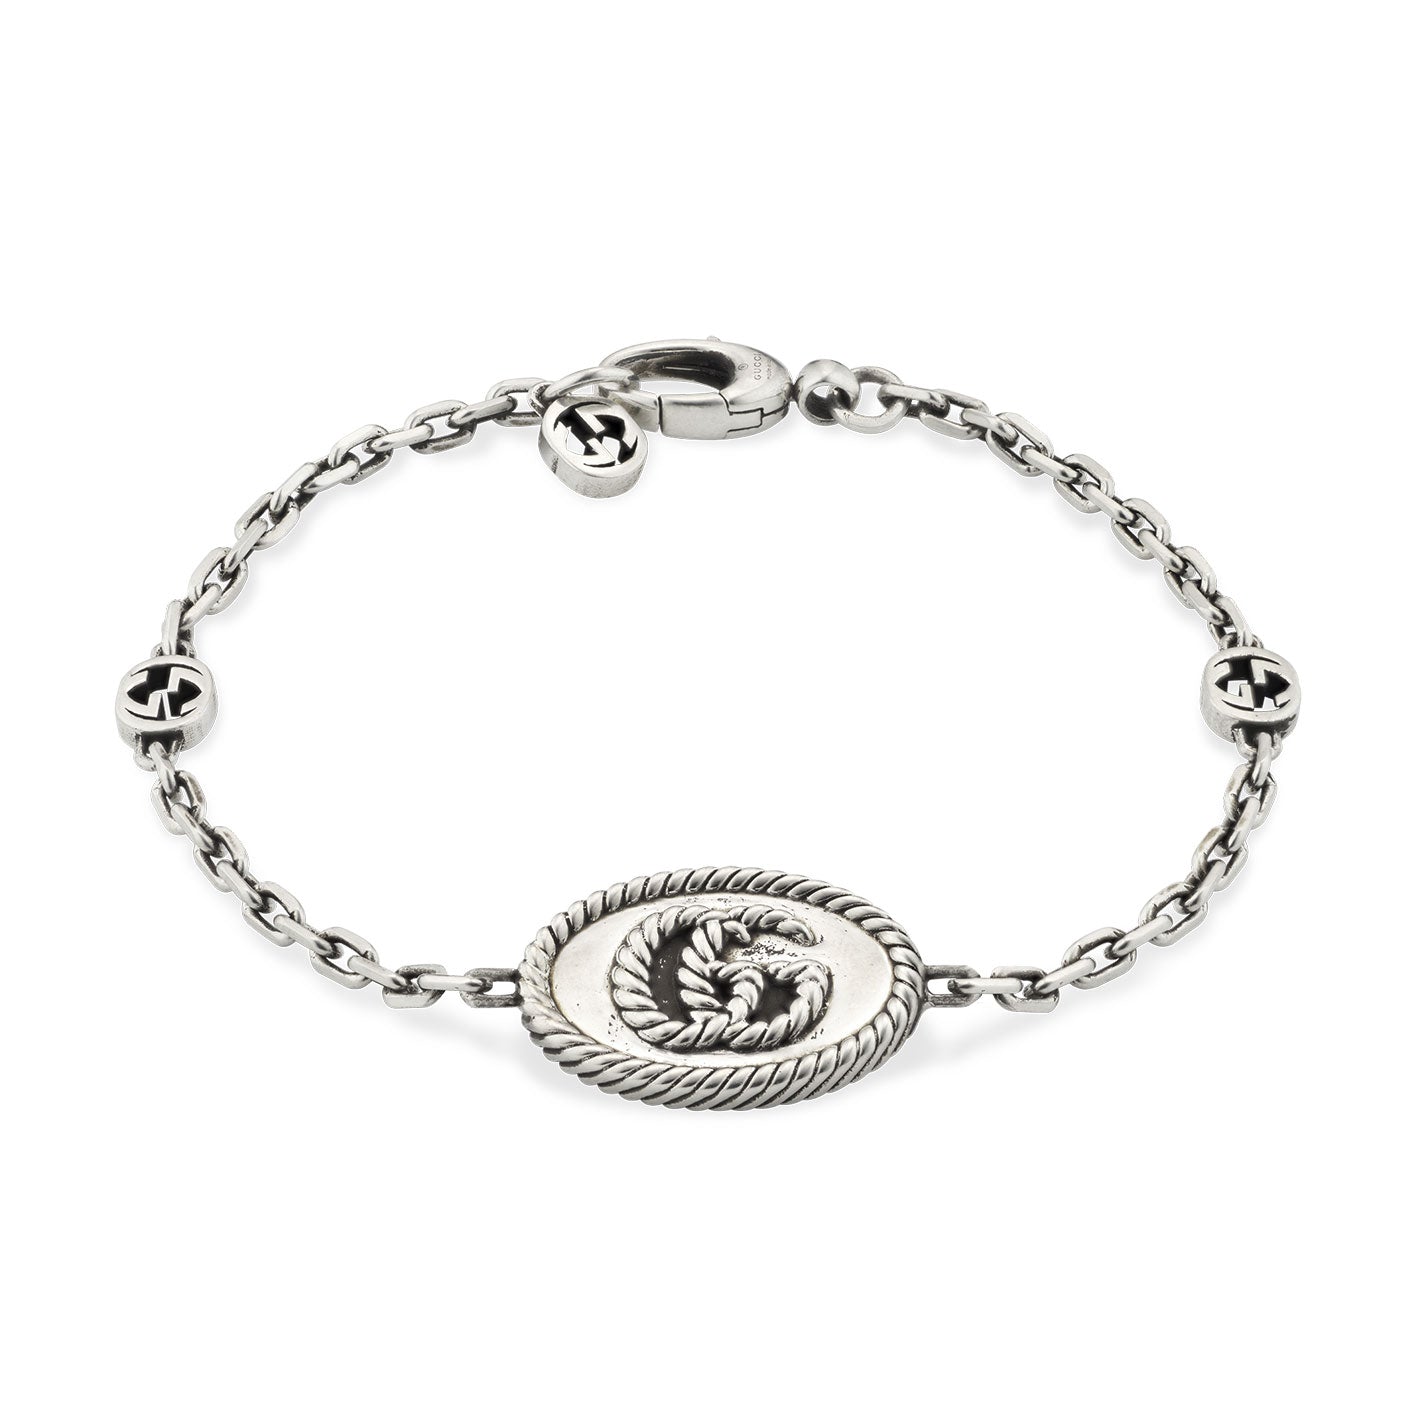 Gucci Sterling Silver Interlocking G Chain Bracelet with Double G Pendant